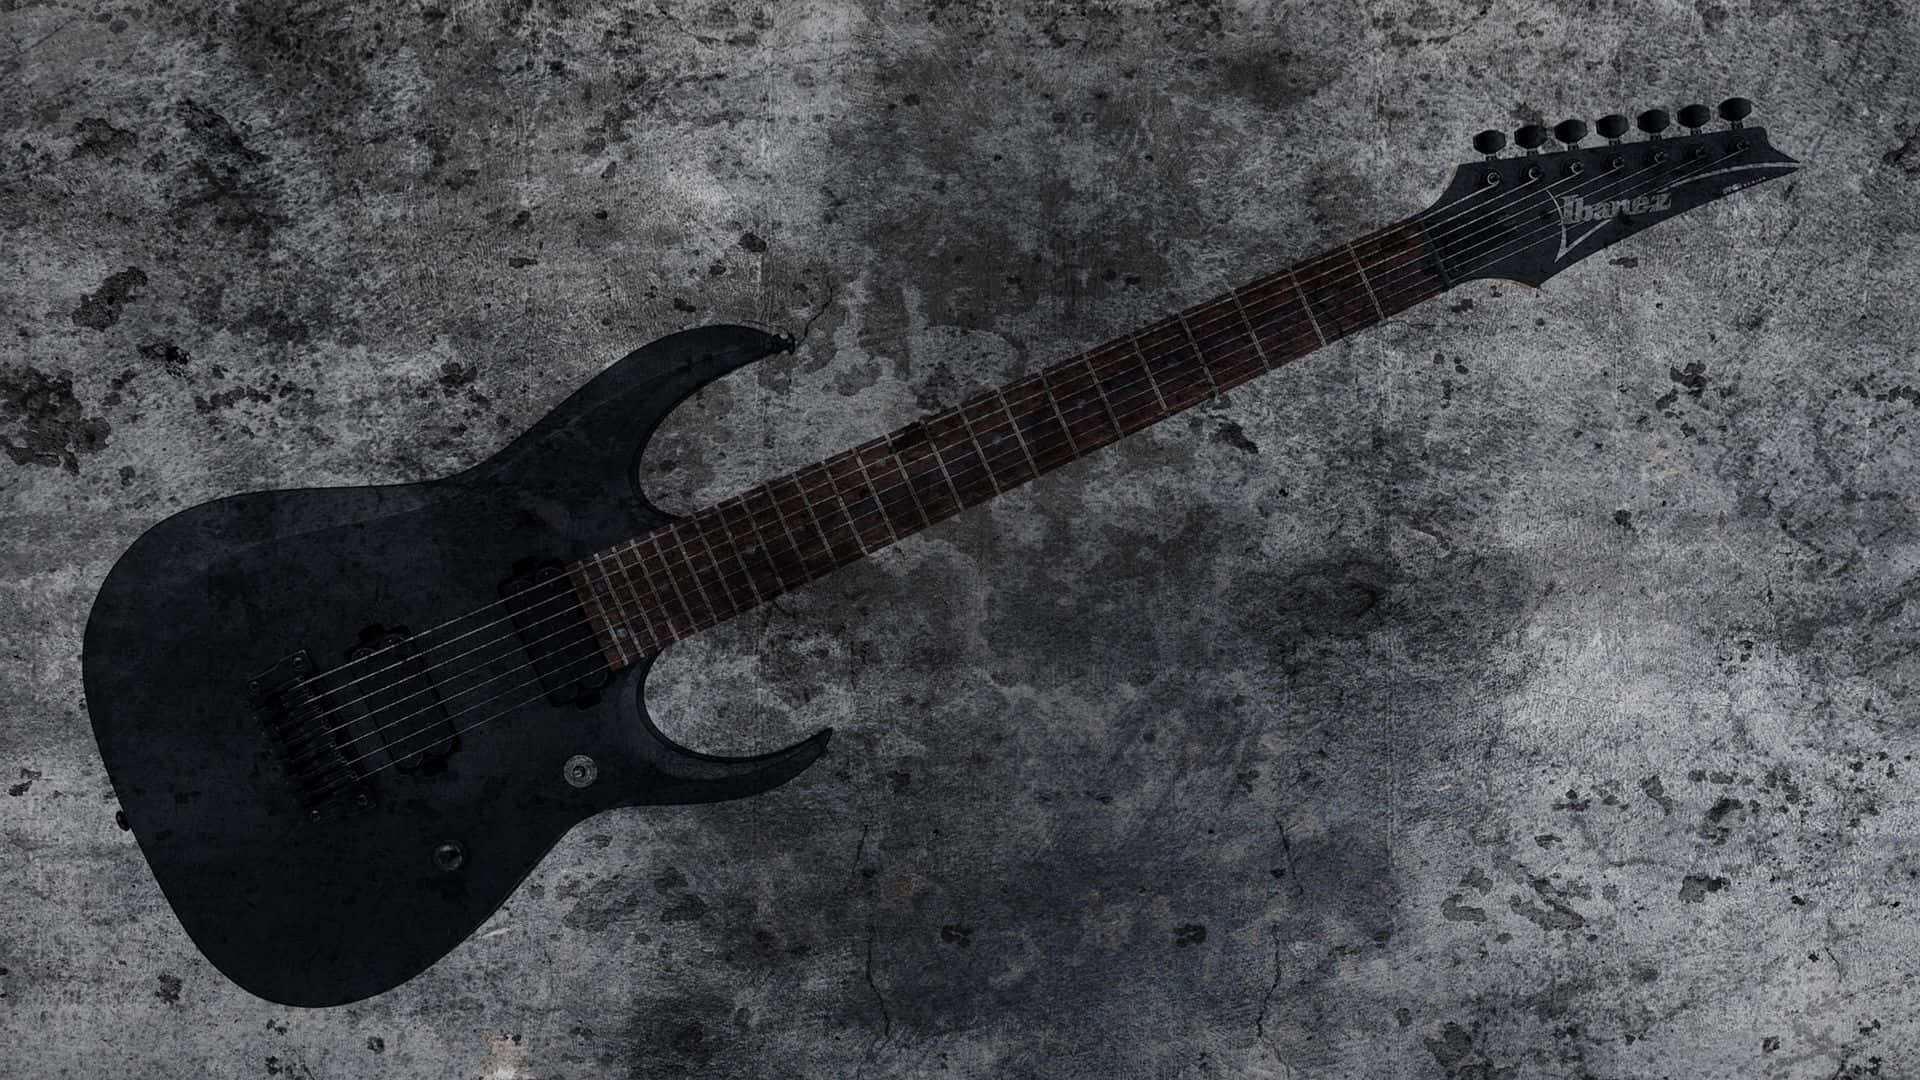 A Black Electric Guitar Is Shown Against A Concrete Wall